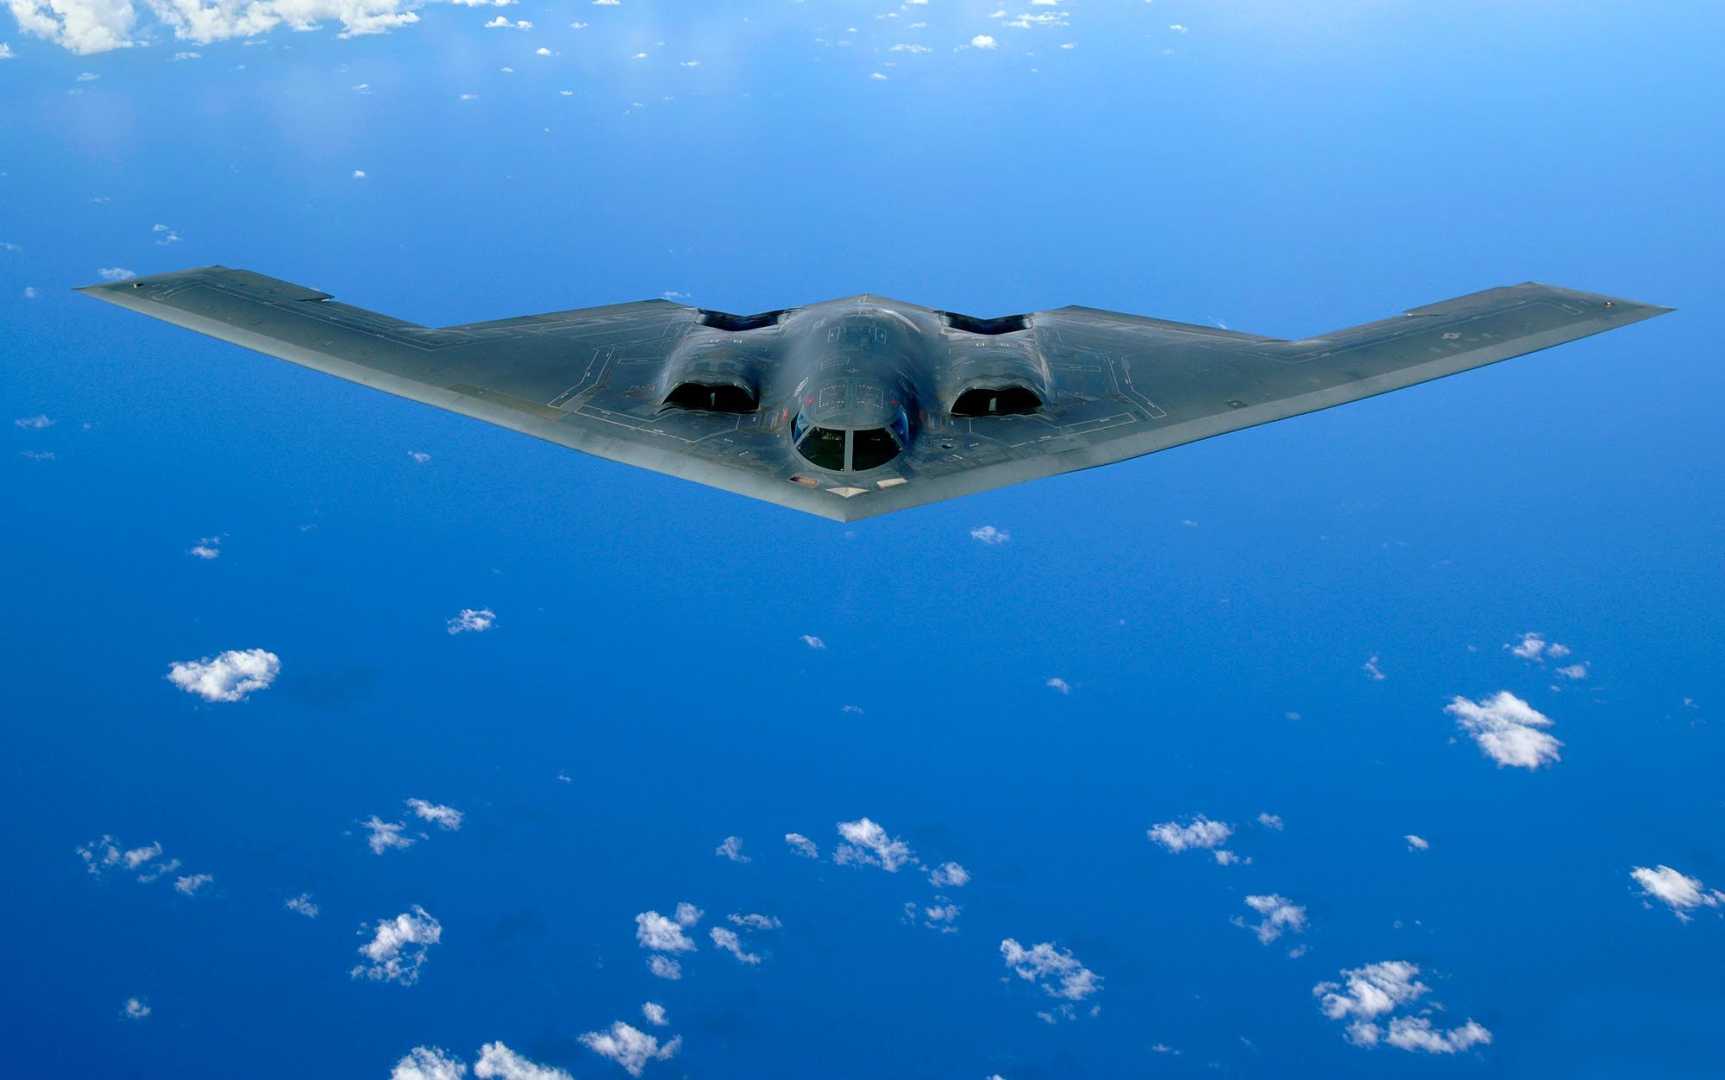 US Air Force B-2 stealth bomber